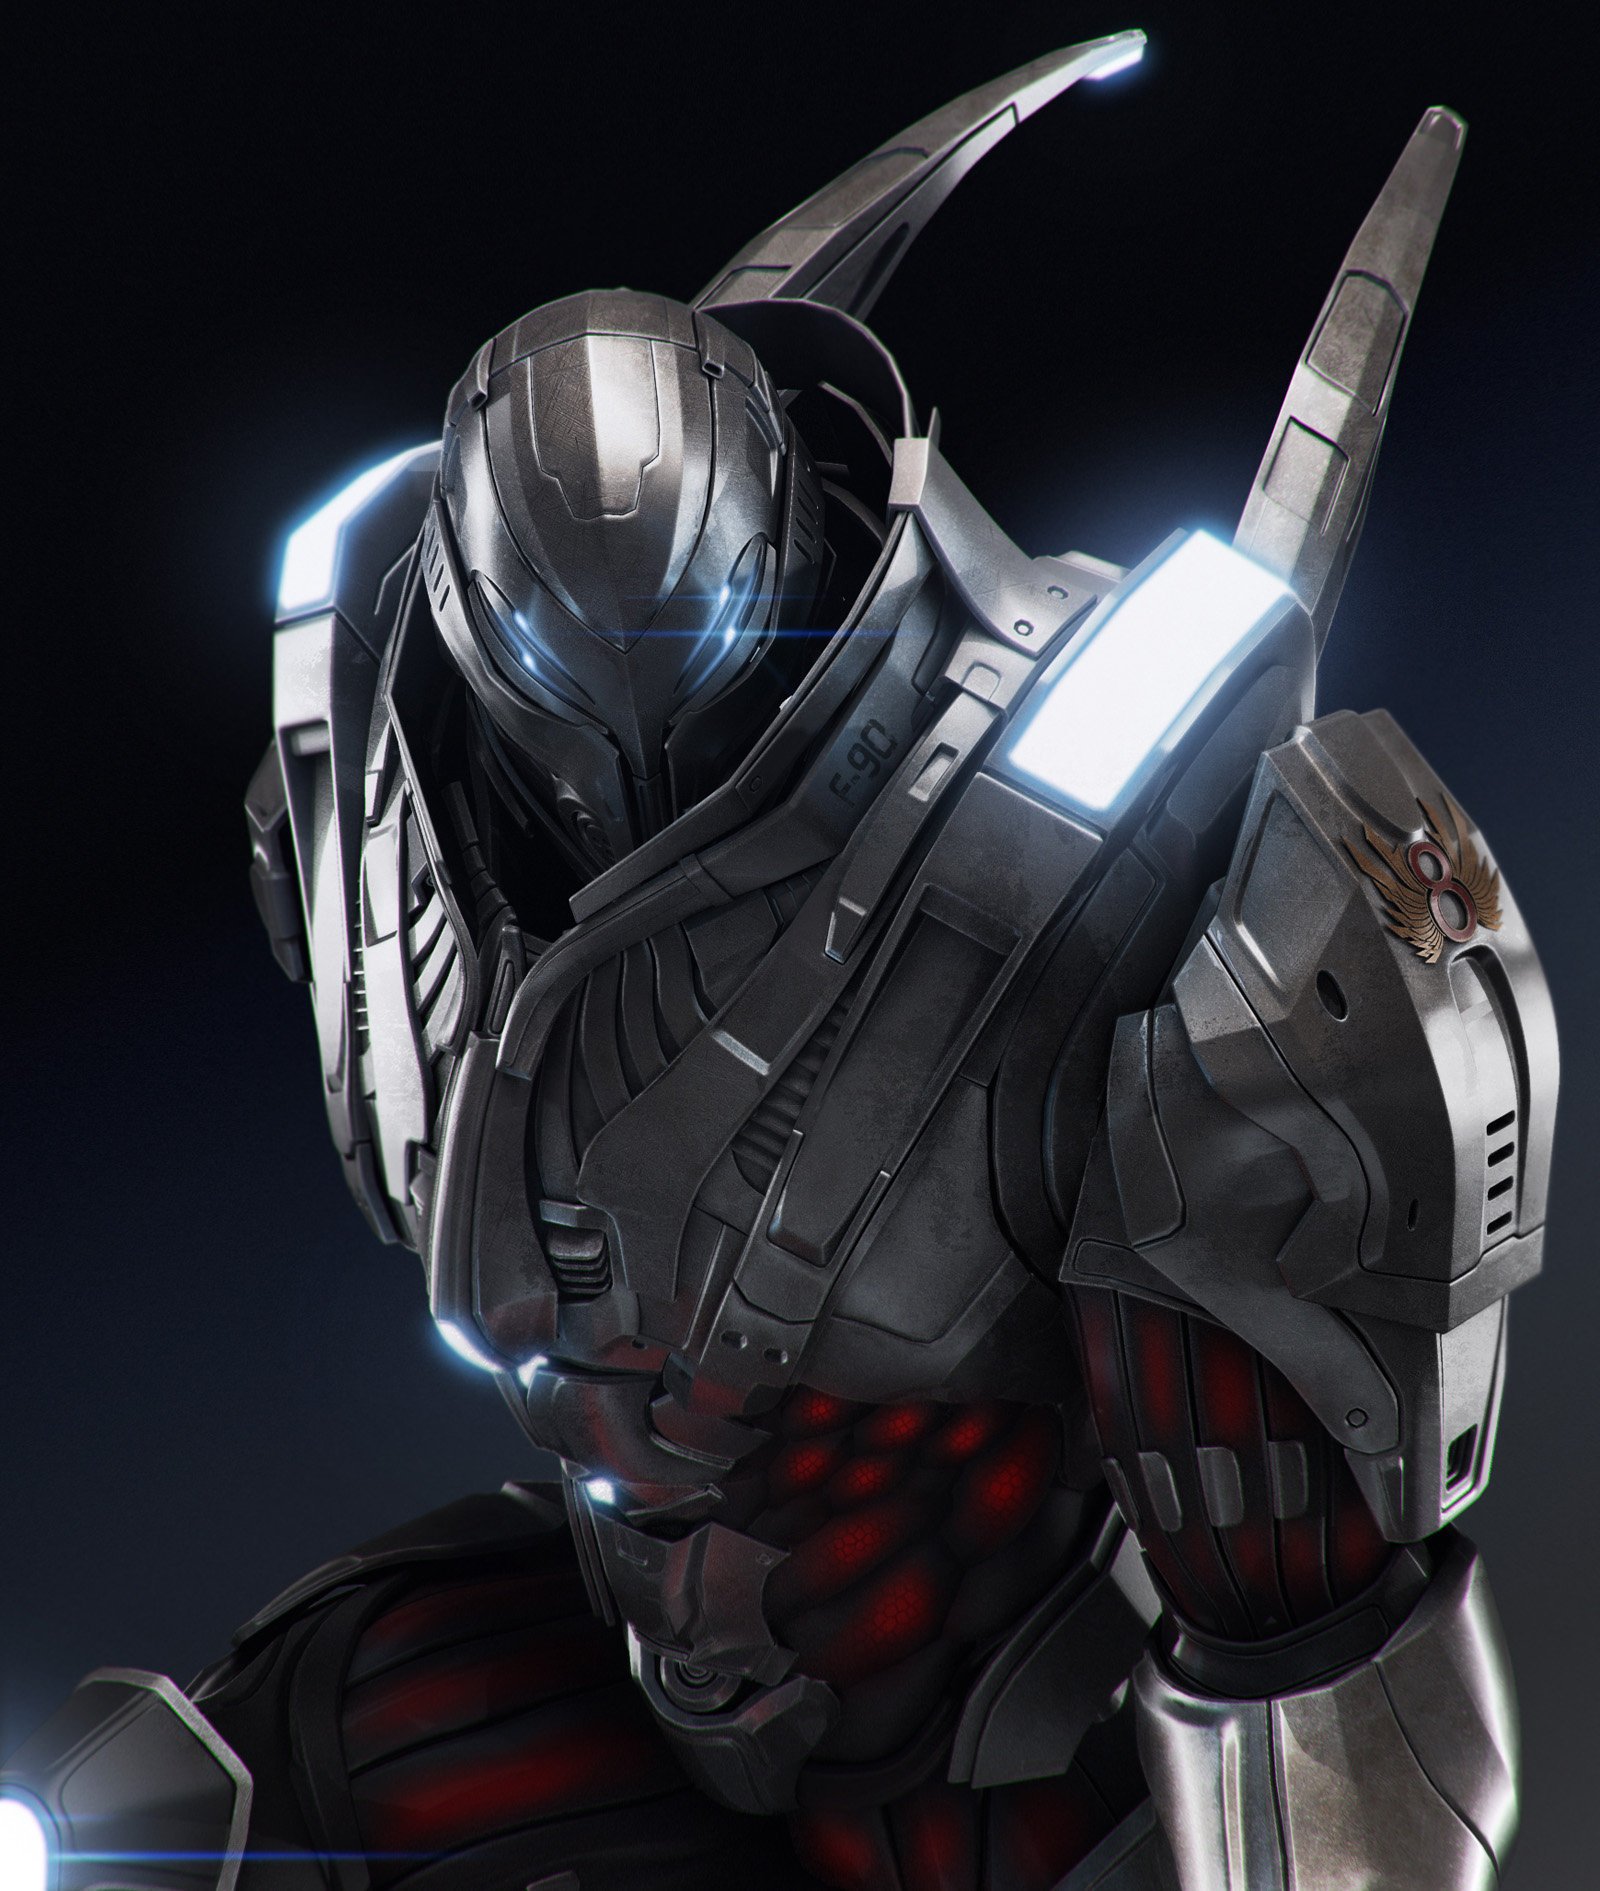 section, 8, Action, Fighting, Futuristic, Sci fi, Warrior, Shooter, 1sect8, Fps, Armor, Suit Wallpaper